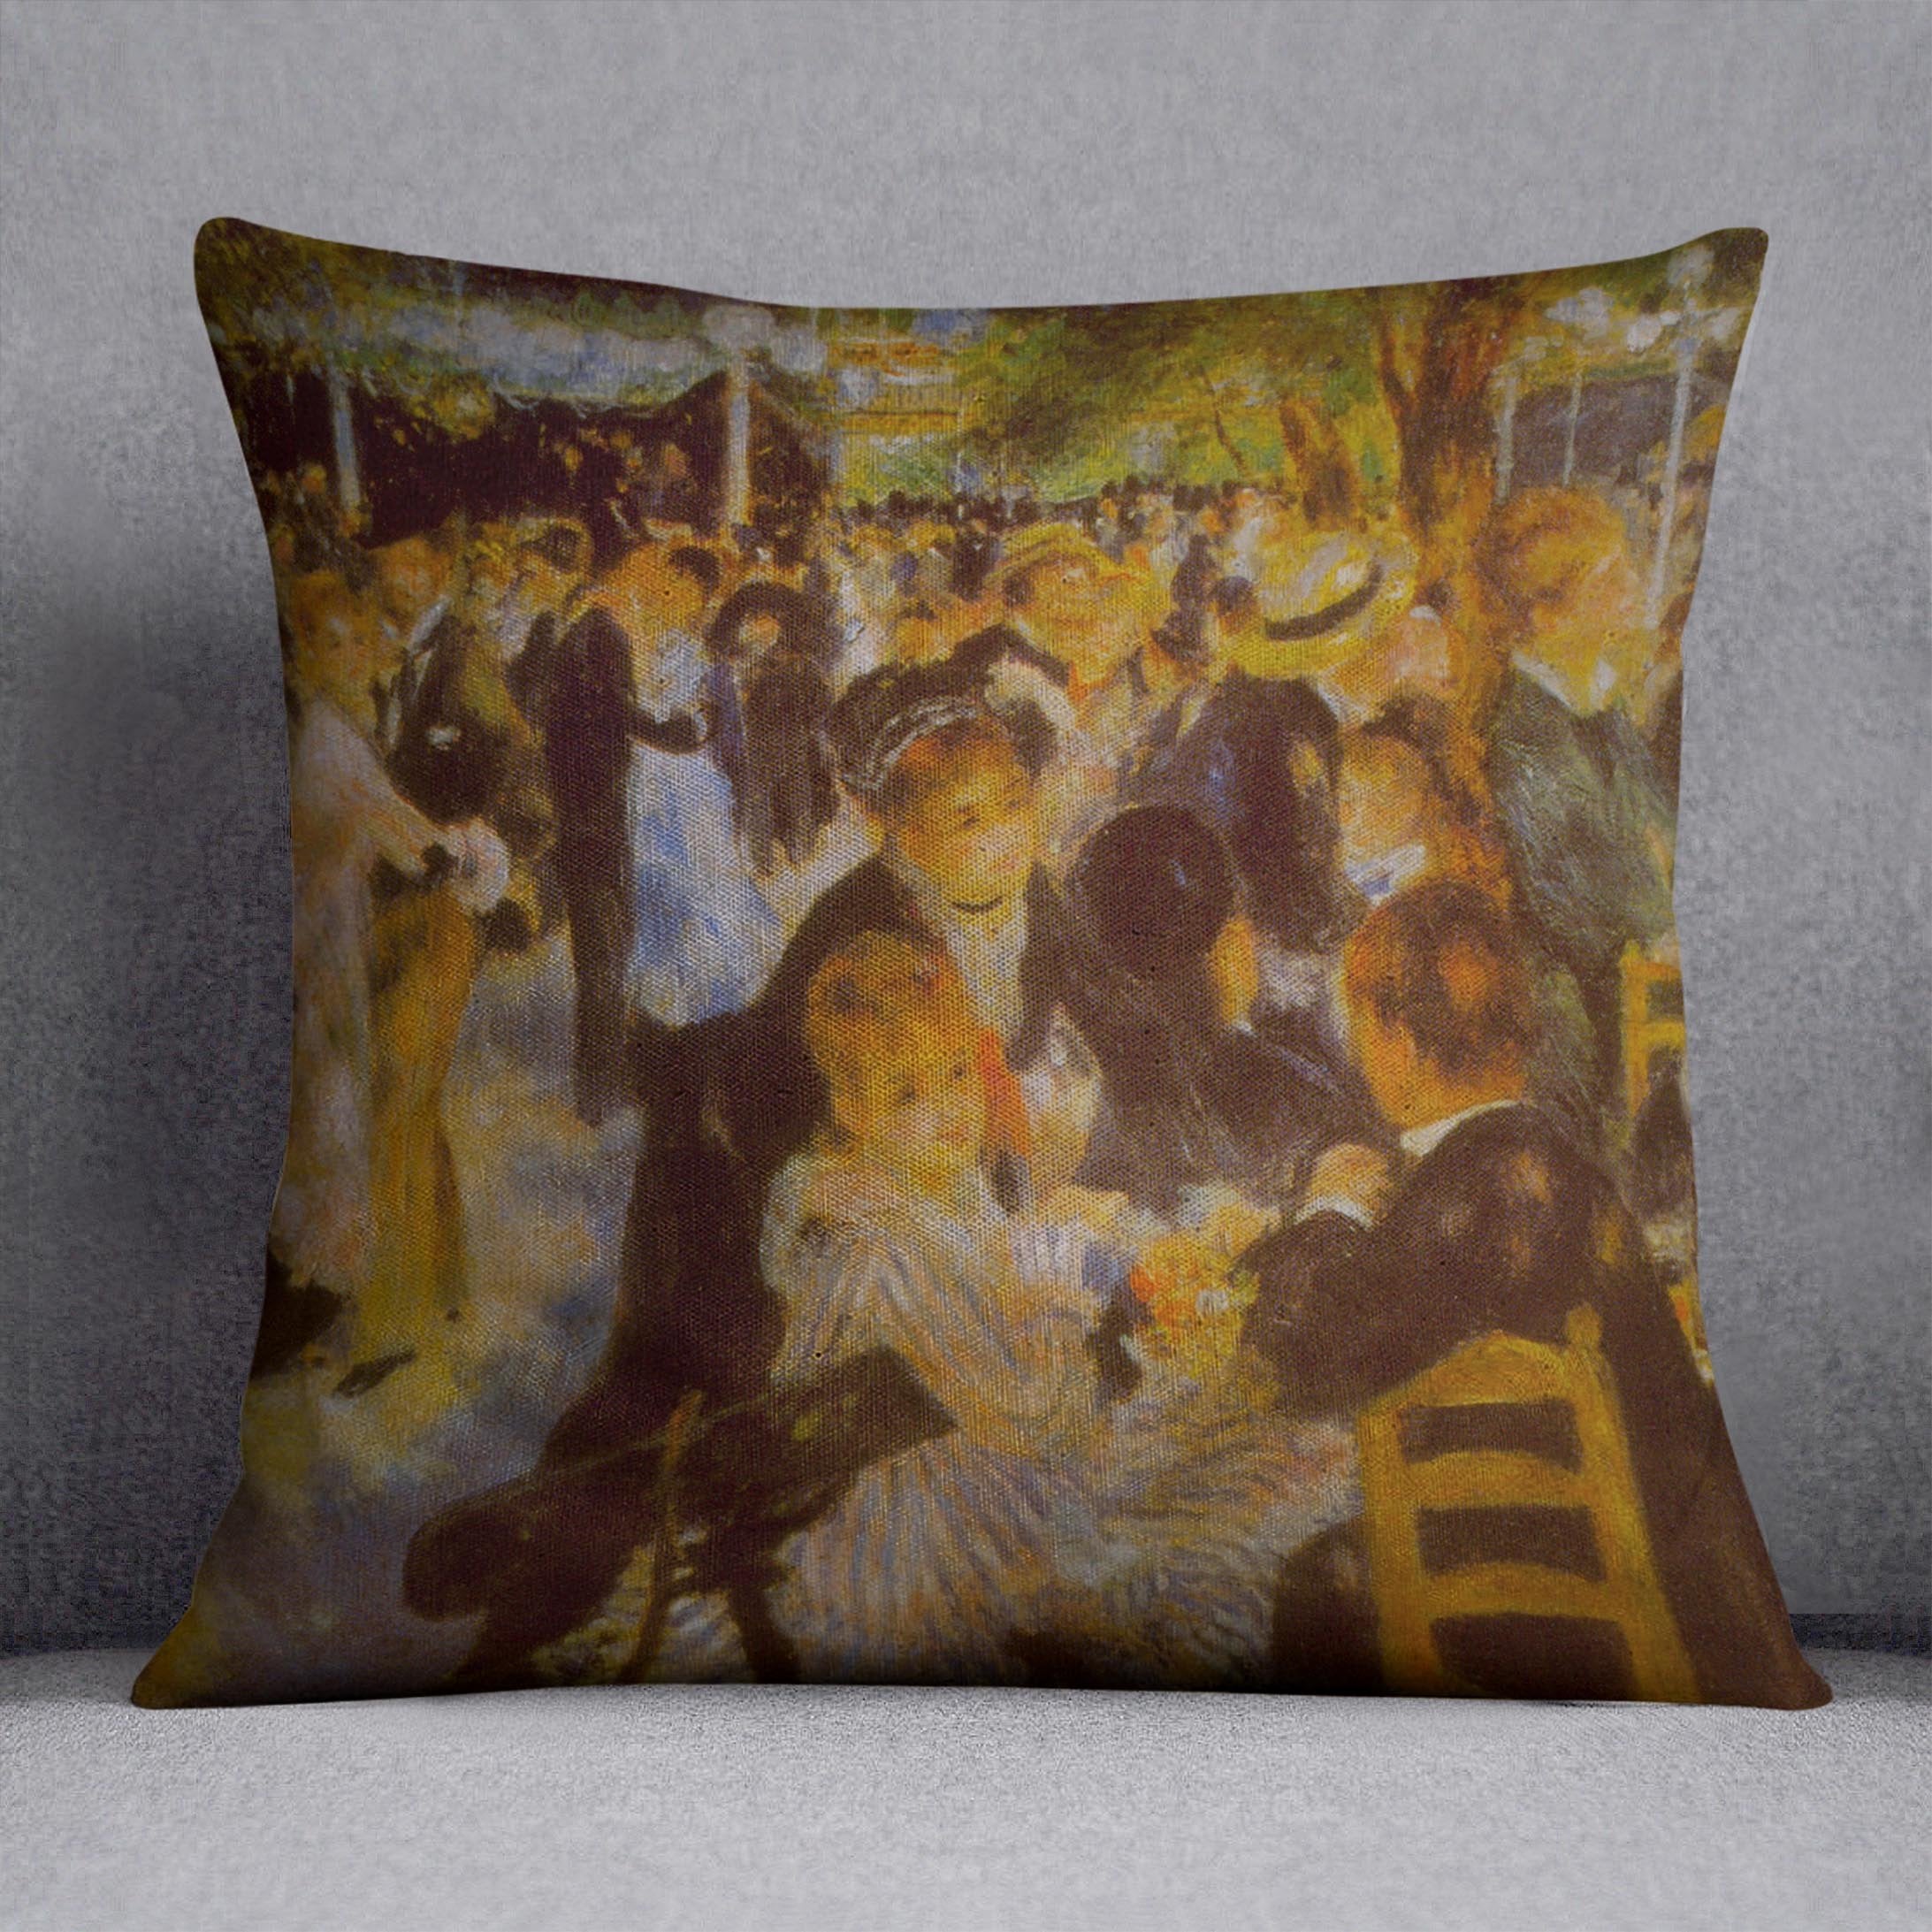 Moulin Galette by Renoir Throw Pillow